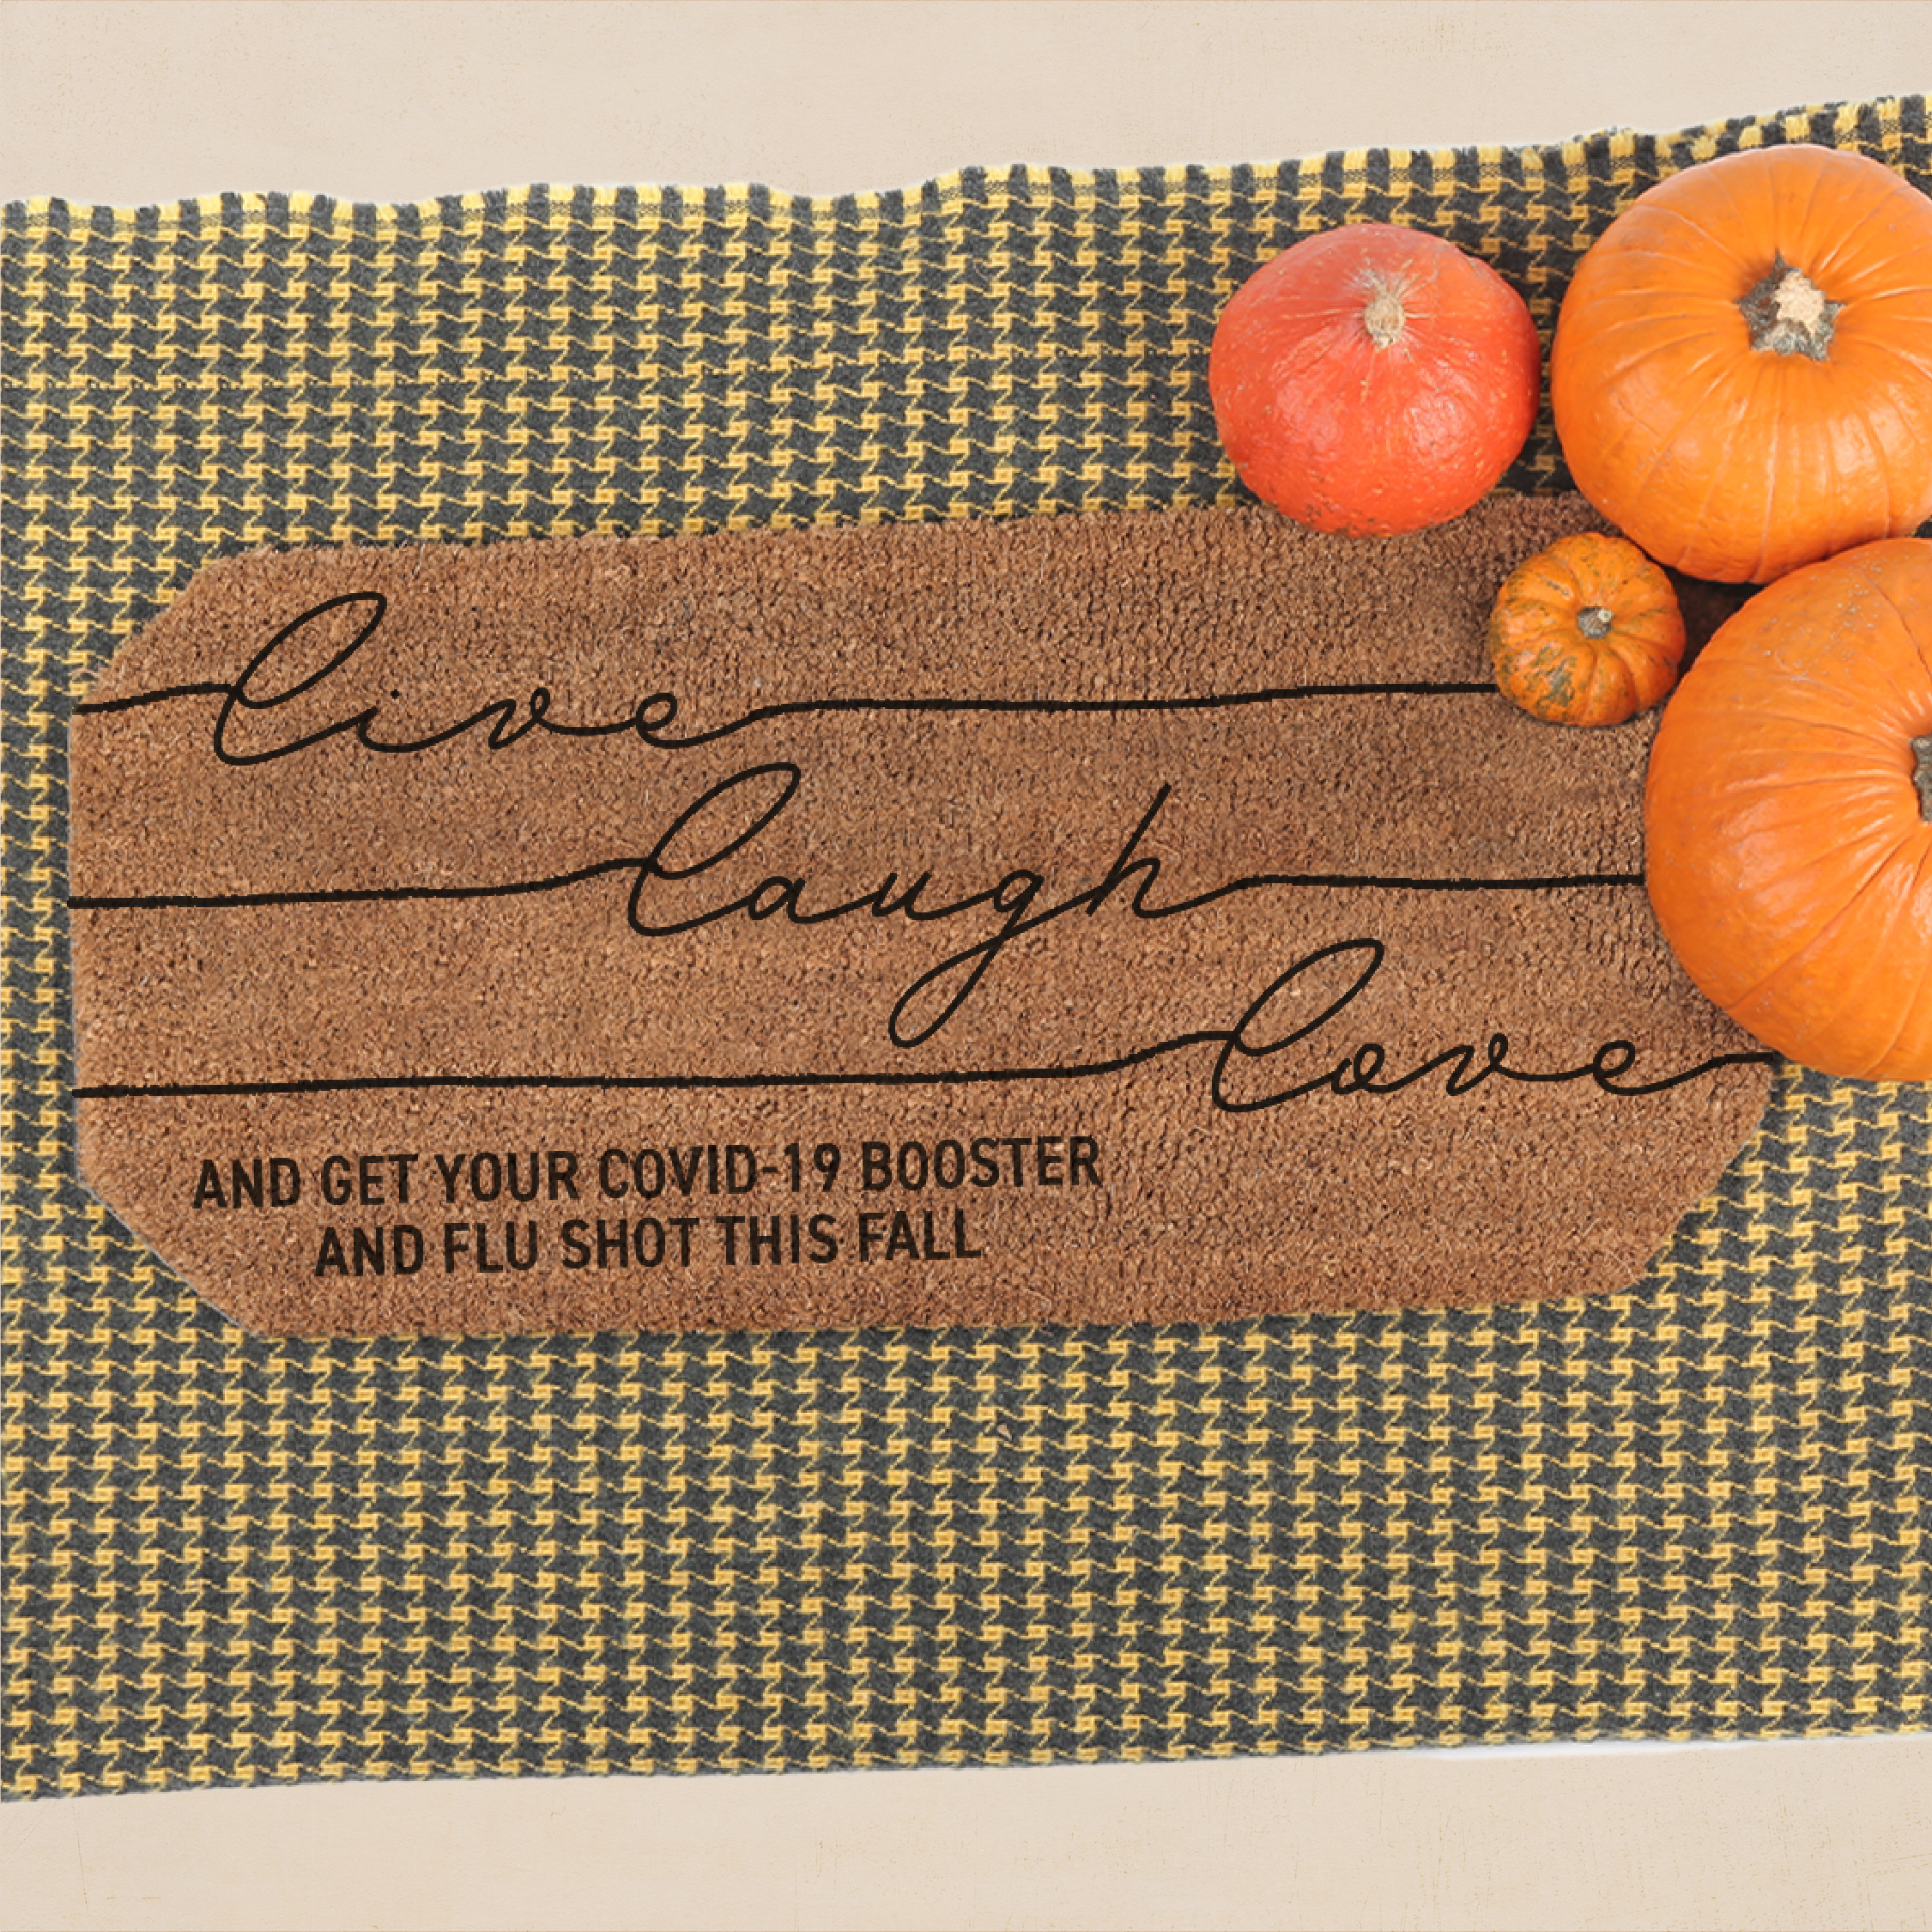 A doormat says "live laugh love and get your COVID-19 booster and flu shot this fall". There is an assortment of pumpkins on the top right corner